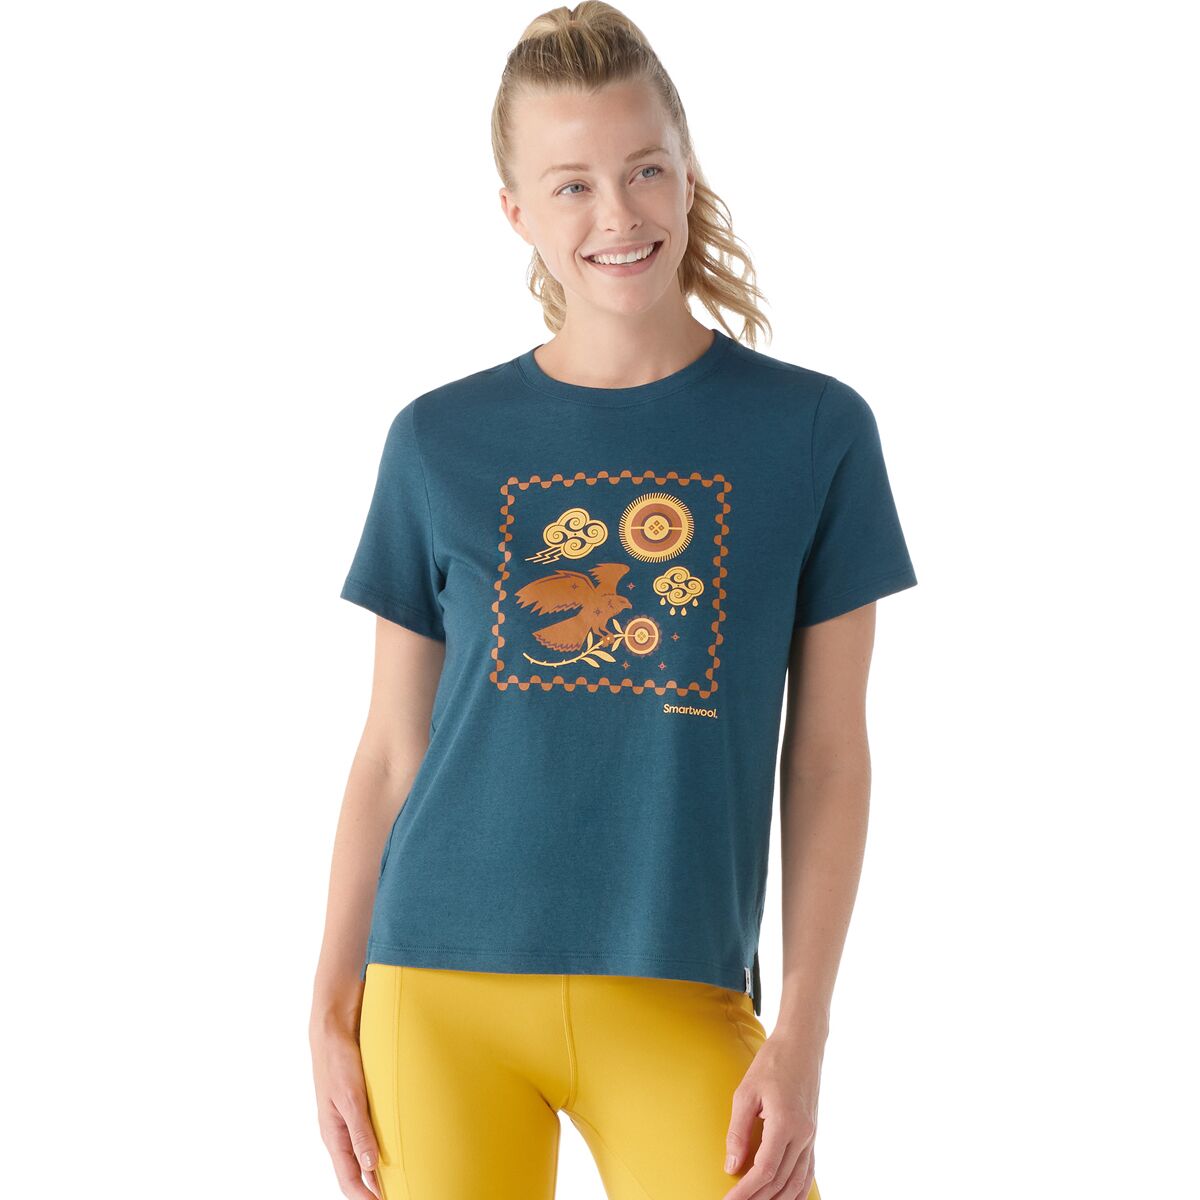 Guardian of the Skies Graphic Short-Sleeve T-Shirt - Women